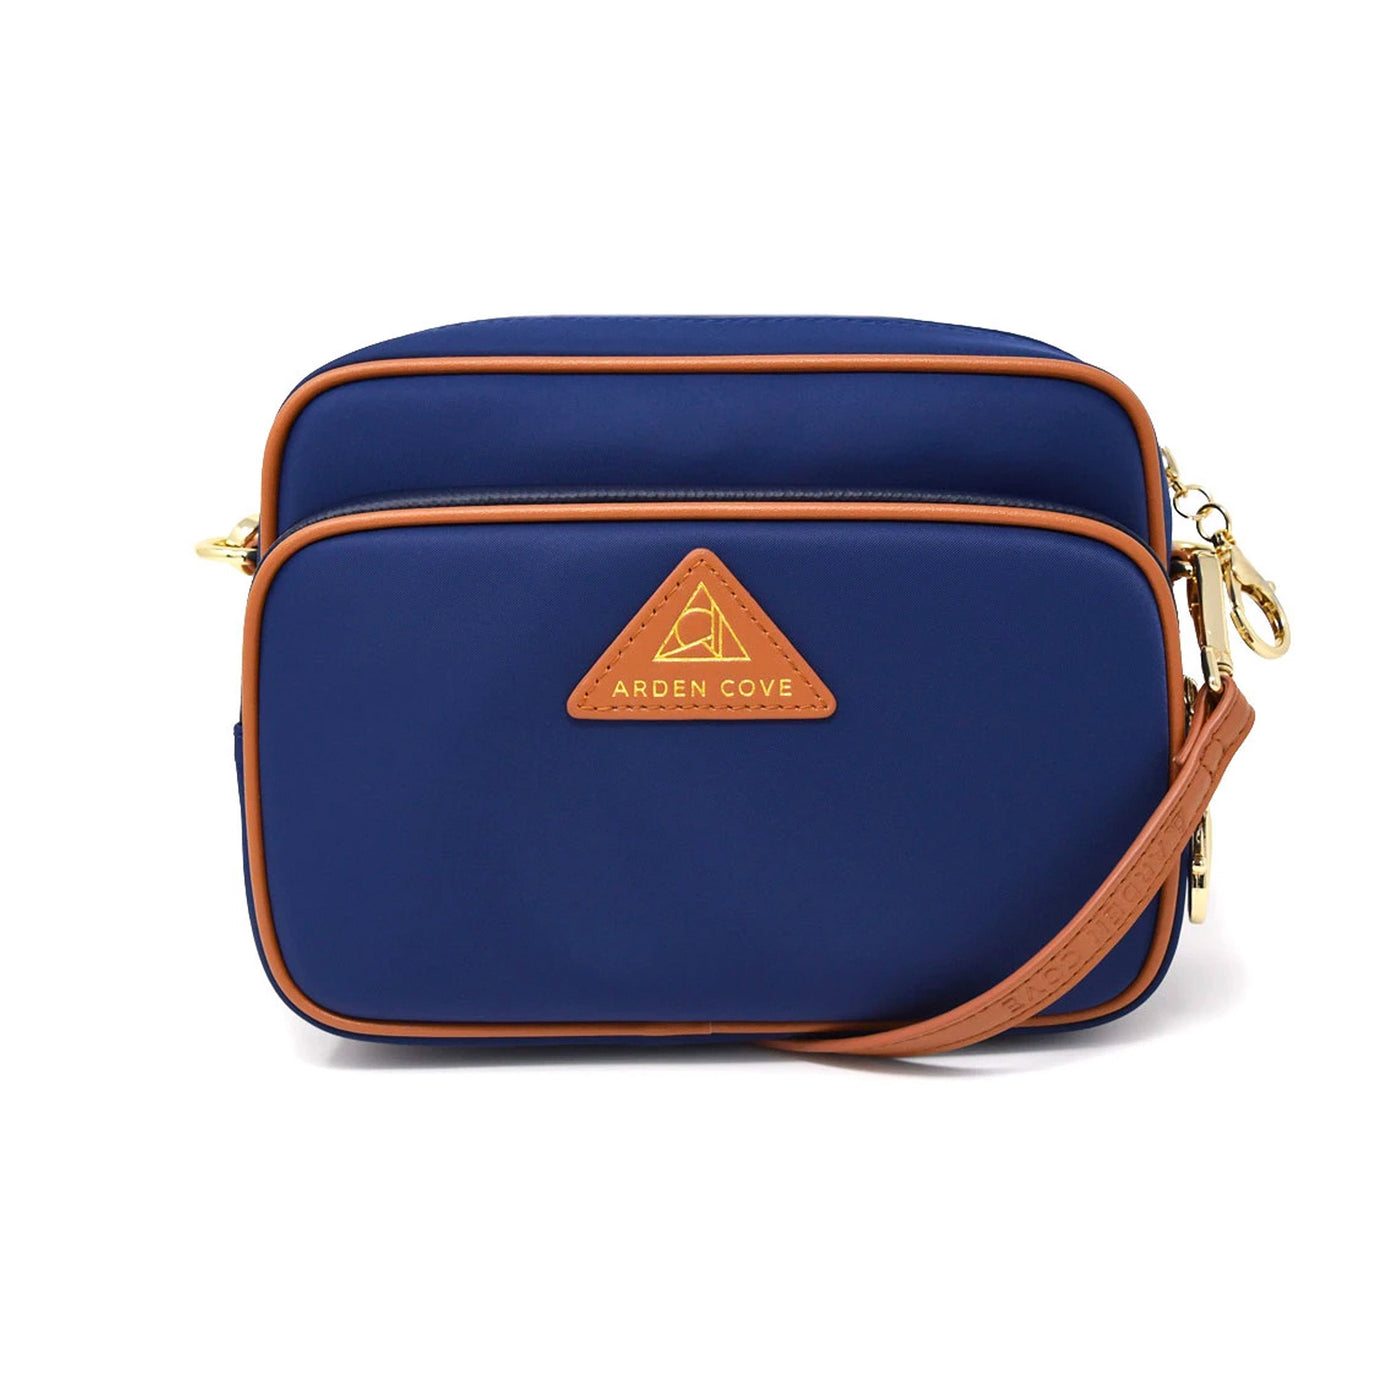 Anti-theft Water-resistant Travel Crossbody - Crissy Full Crossbody in Navy Gold with slash-resistant faux leather & classic clasps straps - front view - Arden Cove